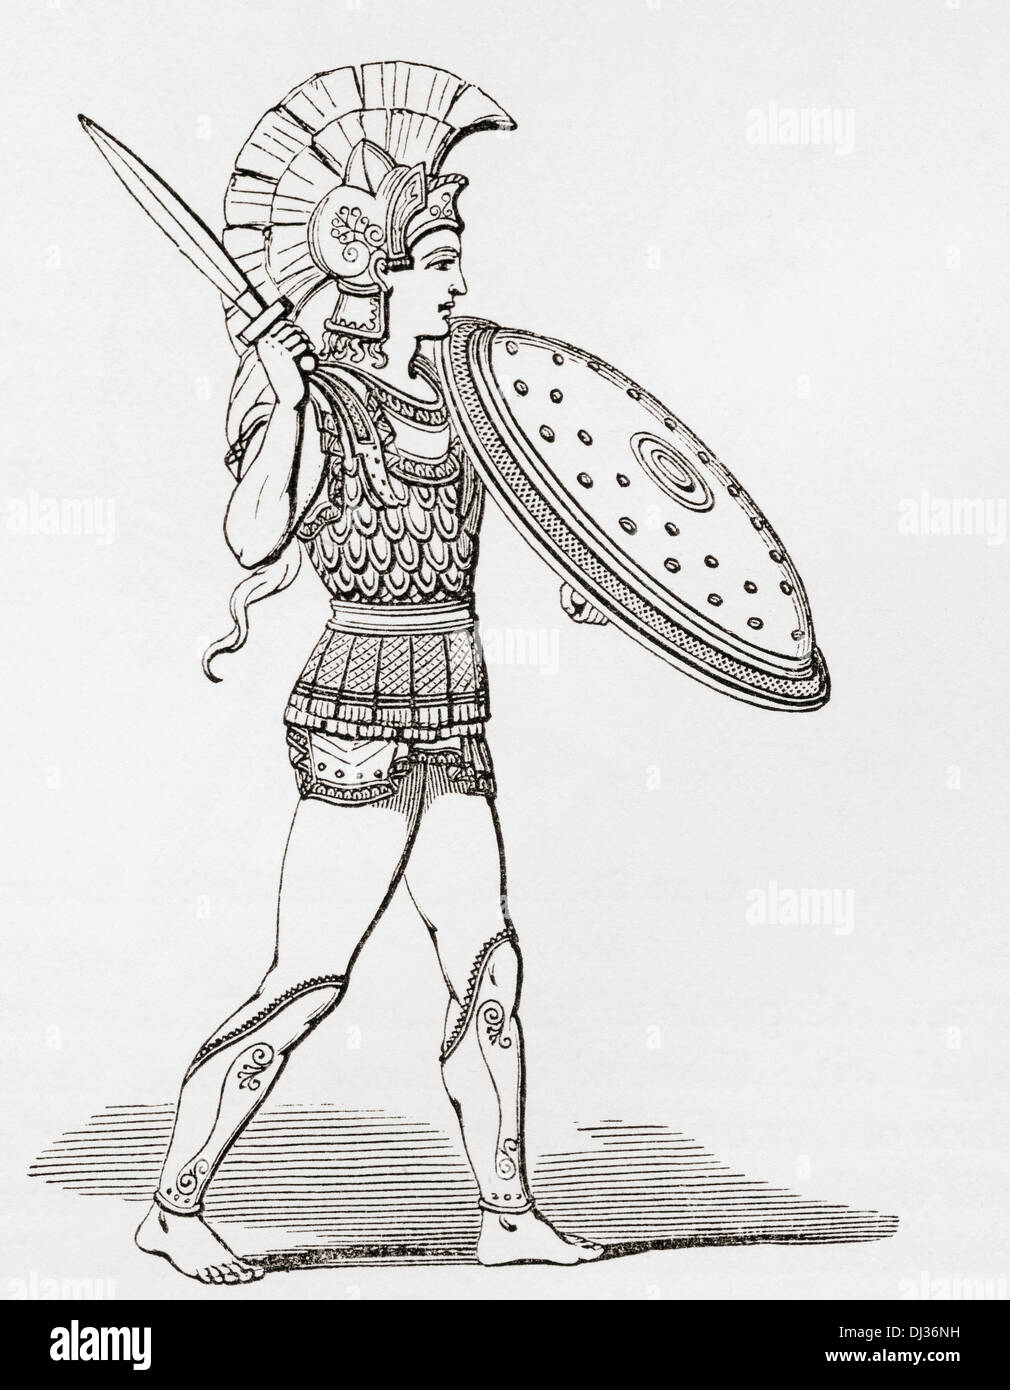 Helmeted Greek warrior wearing greaves and armour holding a Clipeus shield and sword. Stock Photo